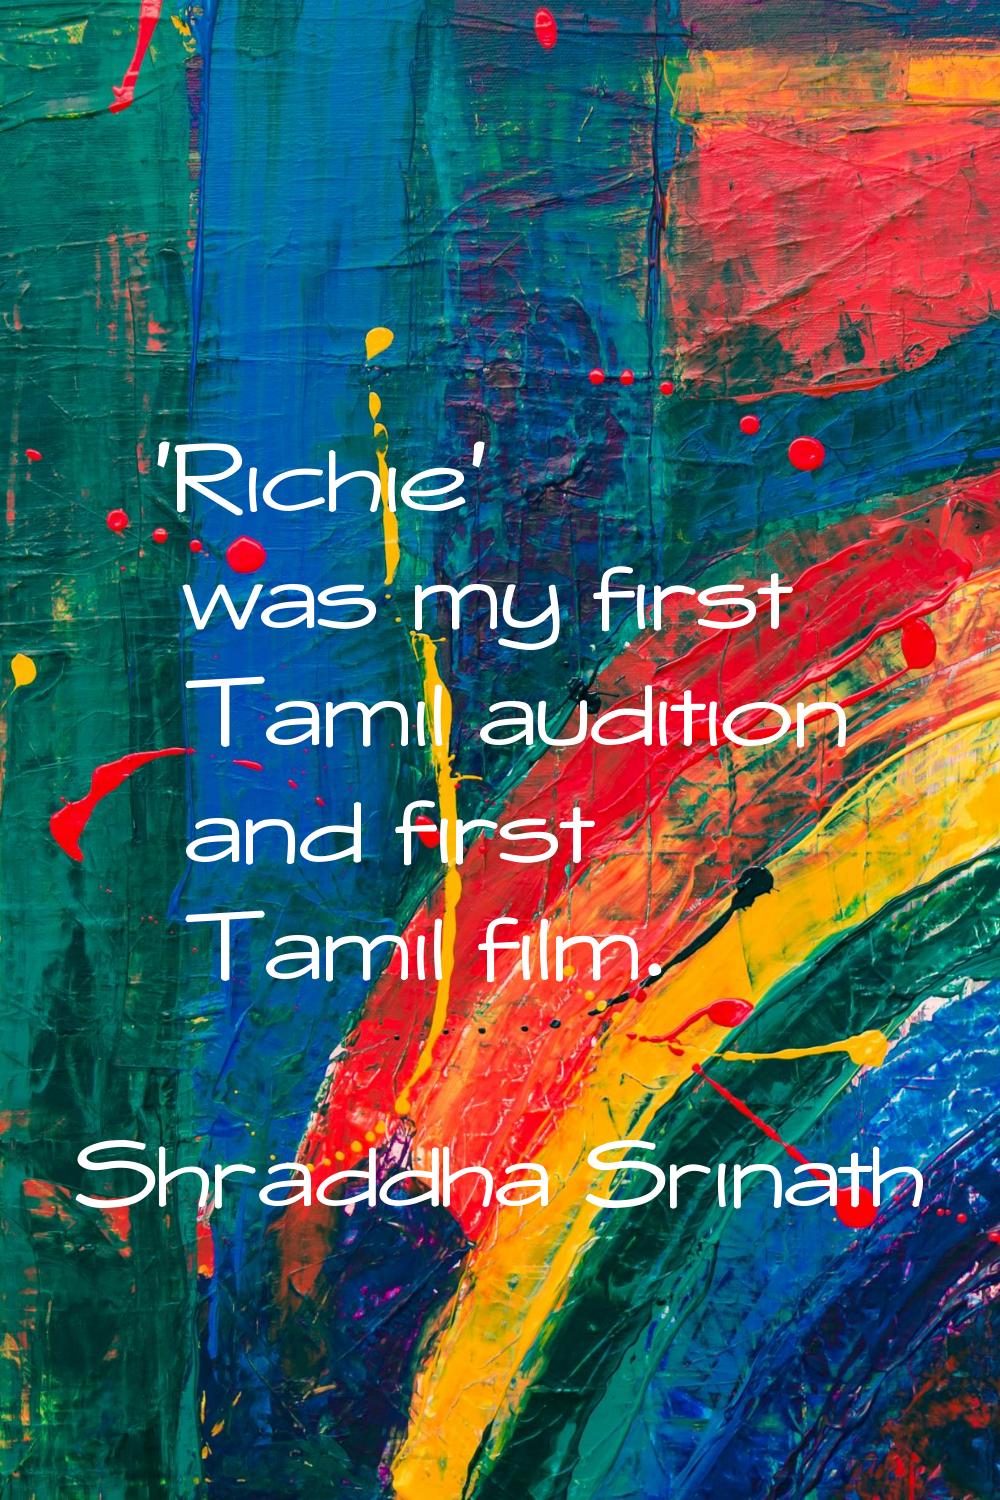 'Richie' was my first Tamil audition and first Tamil film.